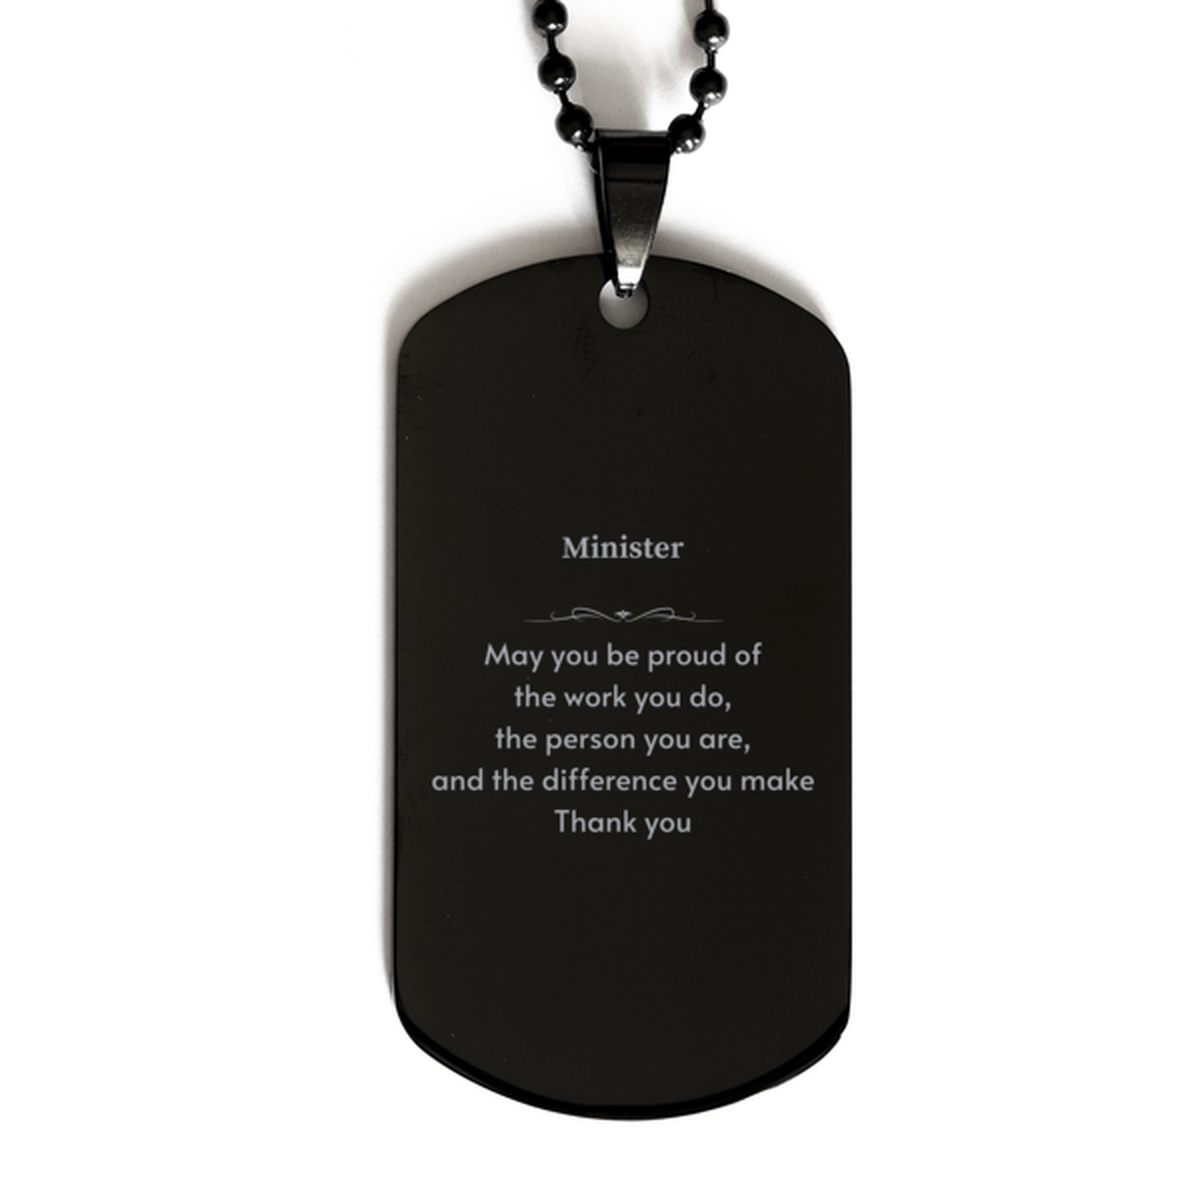 Heartwarming Black Dog Tag Retirement Coworkers Gifts for Minister, Minister May You be proud of the work you do, the person you are Gifts for Boss Men Women Friends